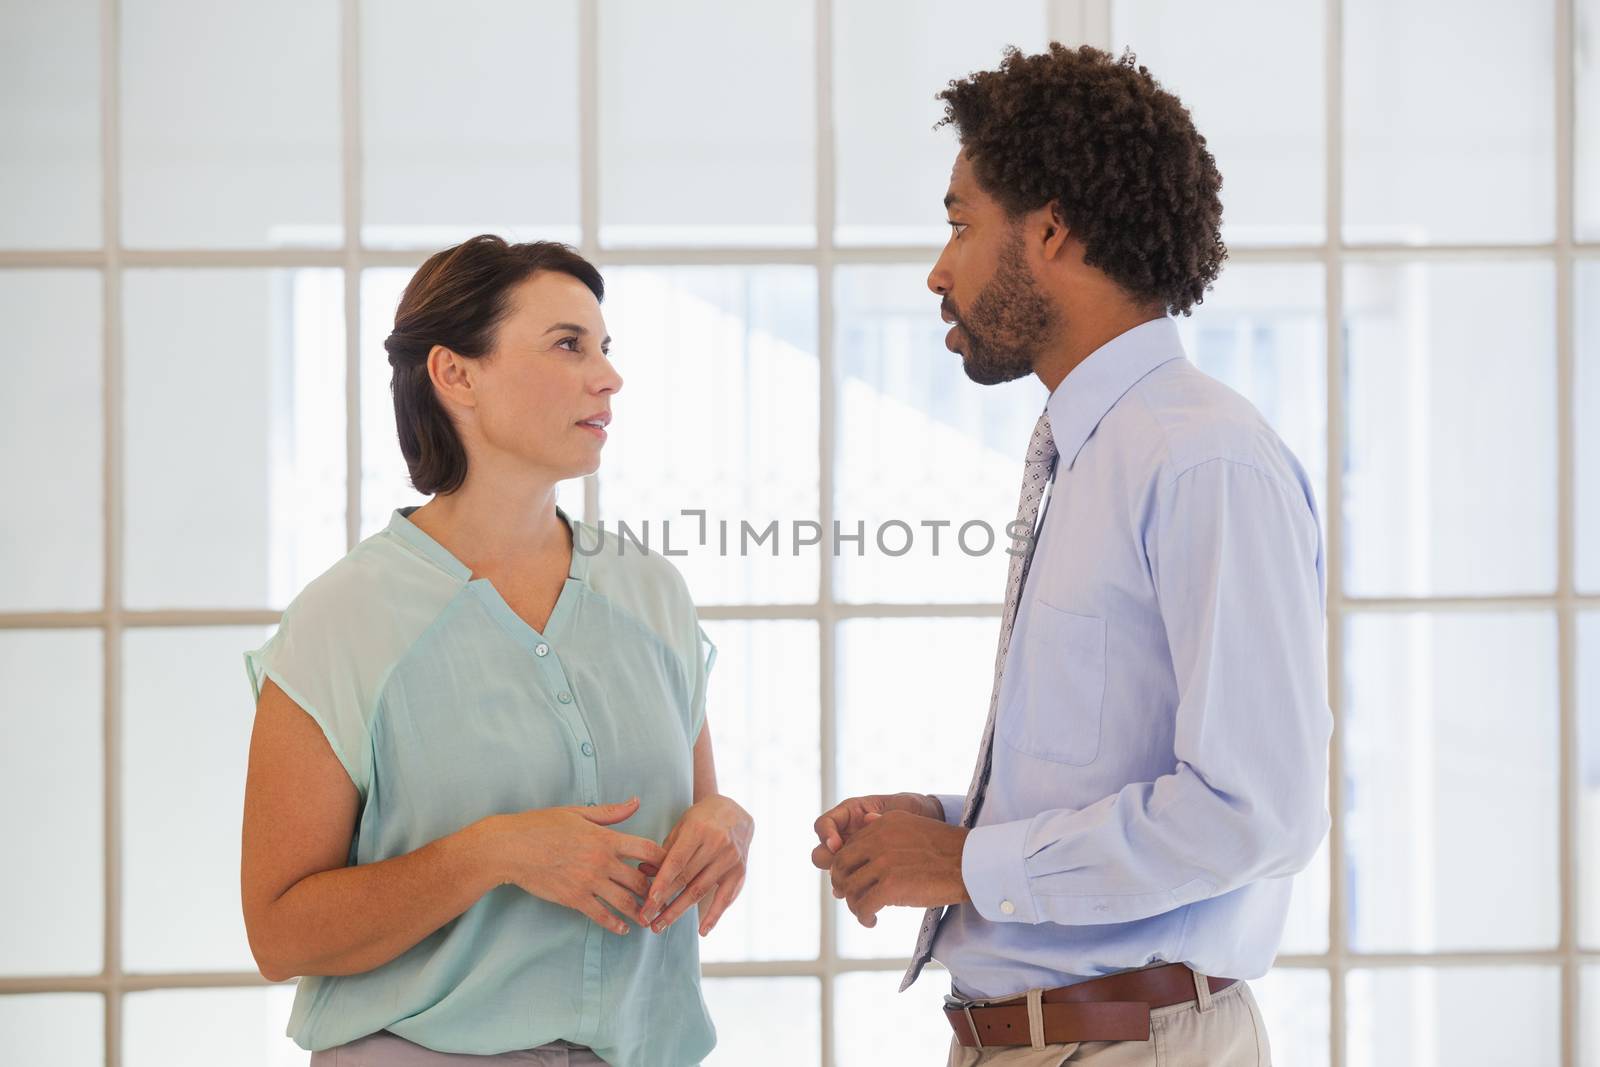 Two young business people having a conversation in the office